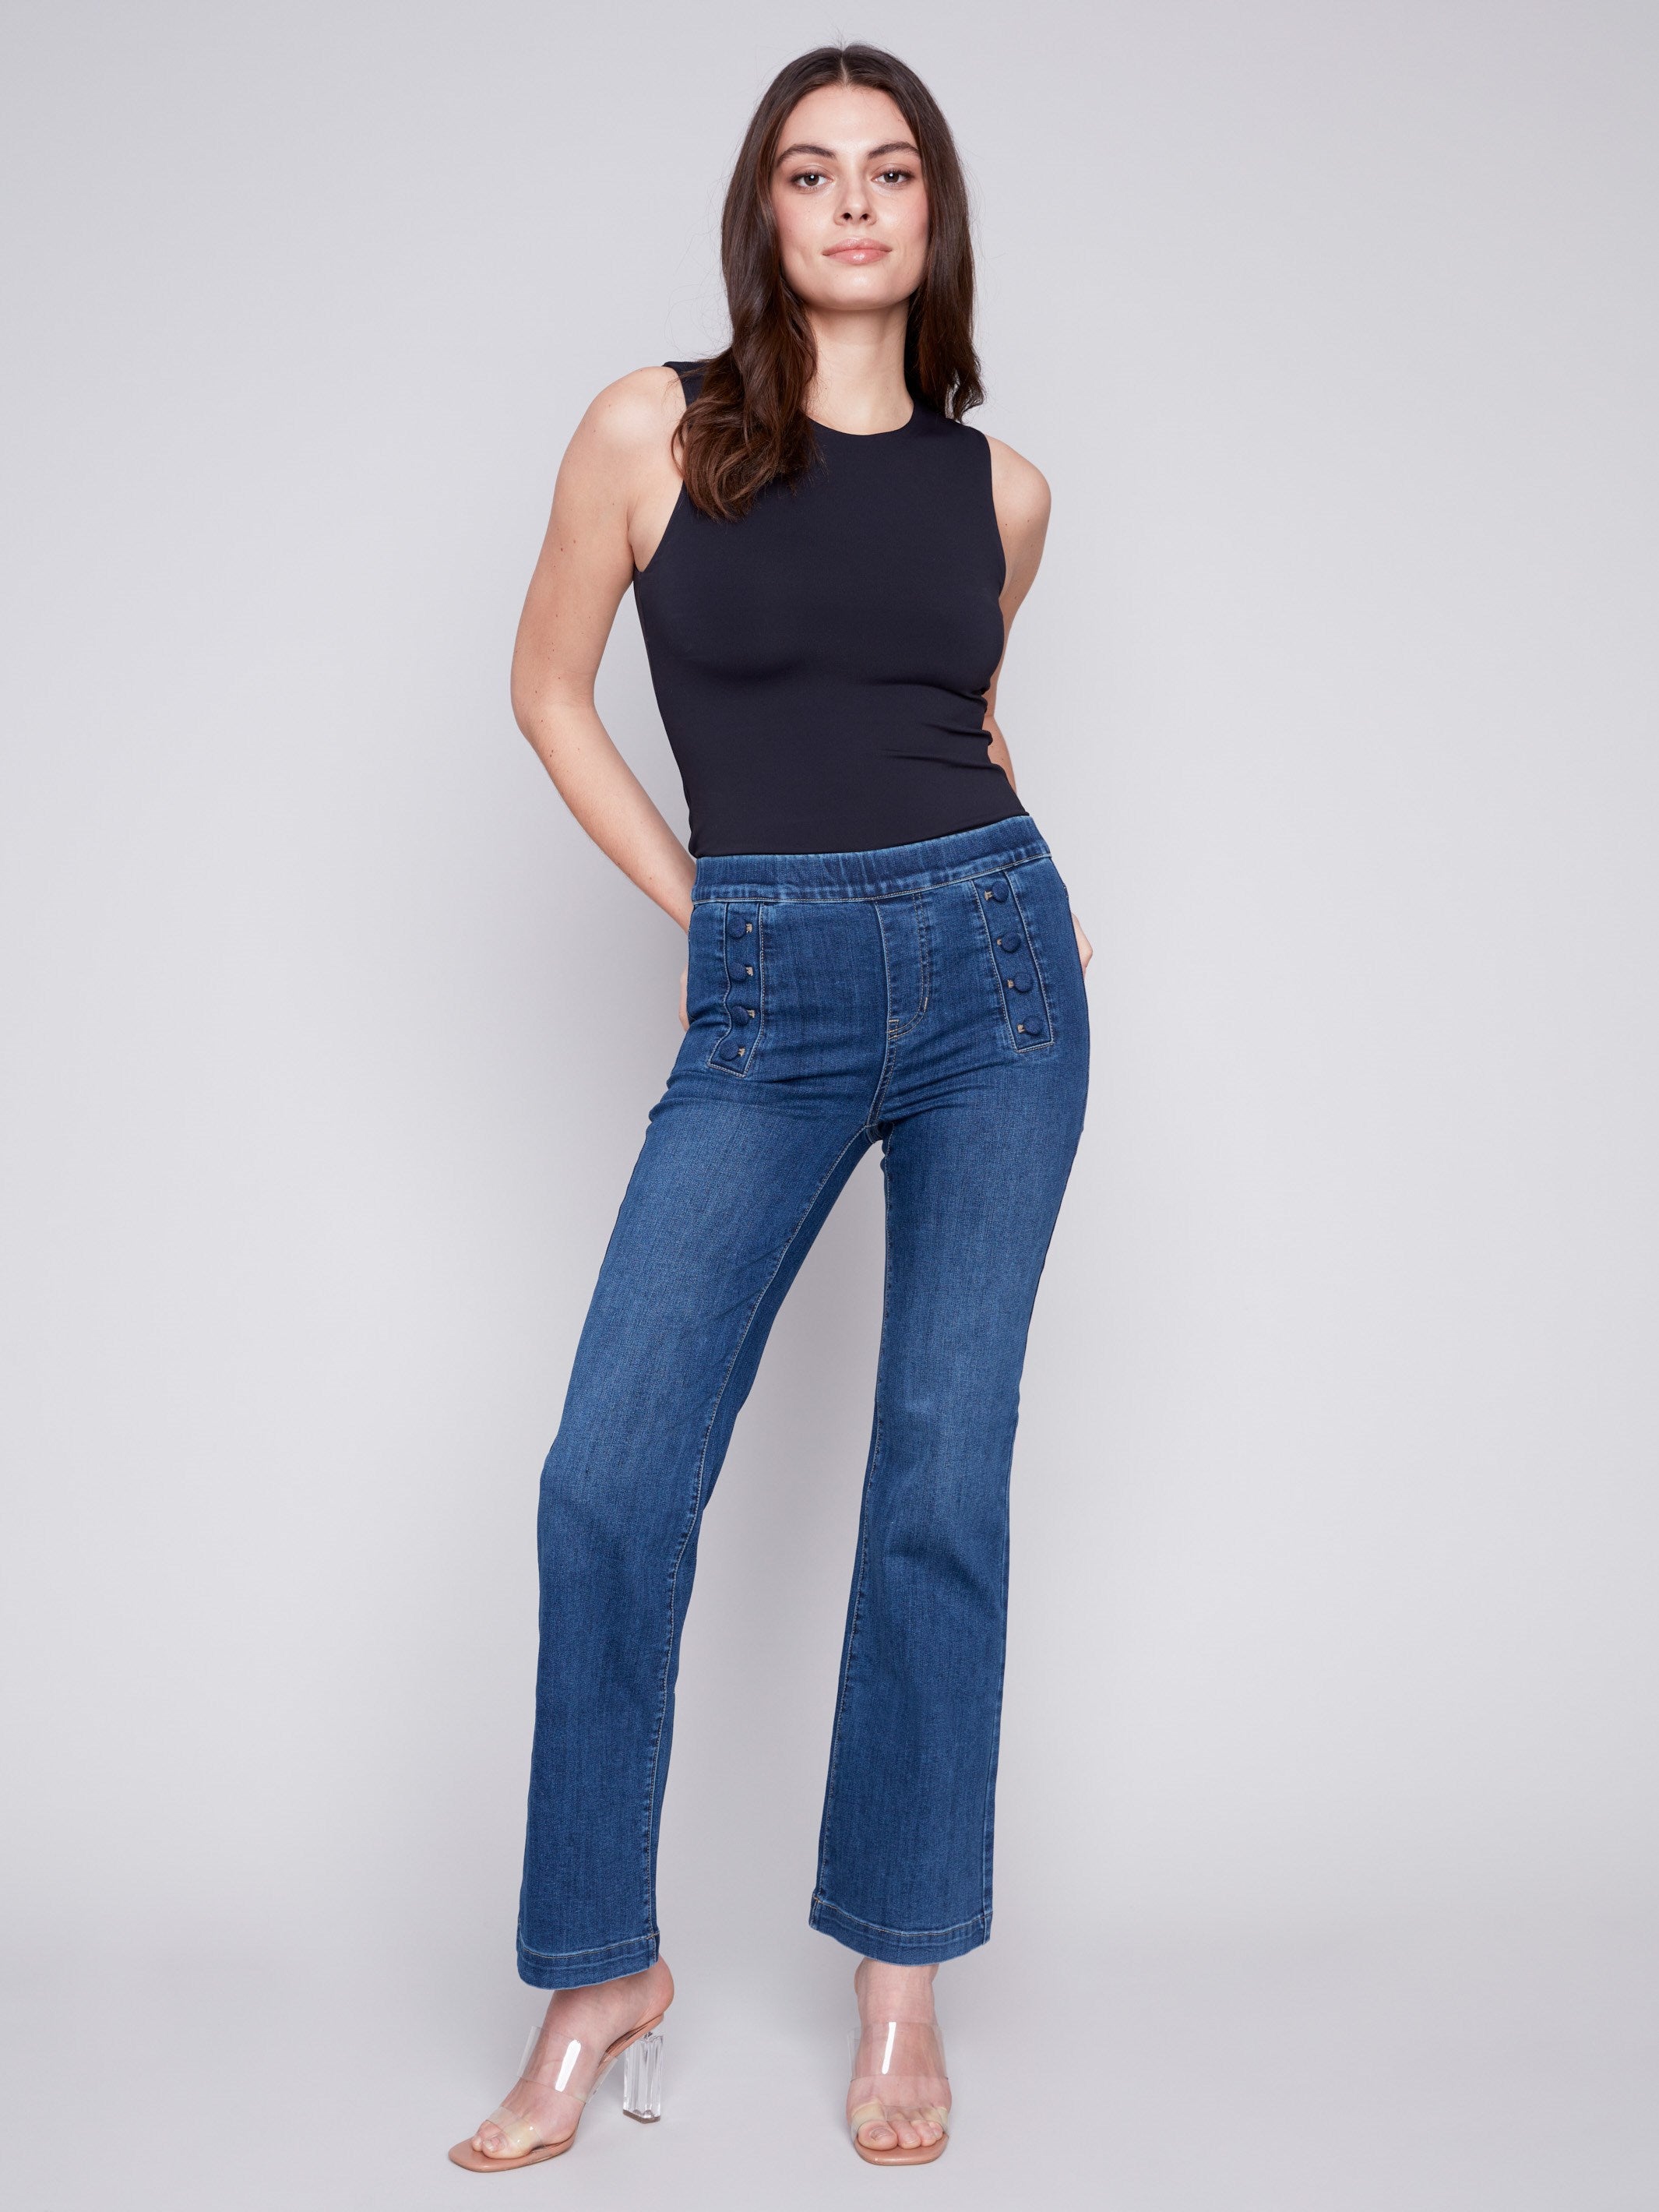 Charlie B Flare Jeans with Decorative Buttons - Indigo - Image 3